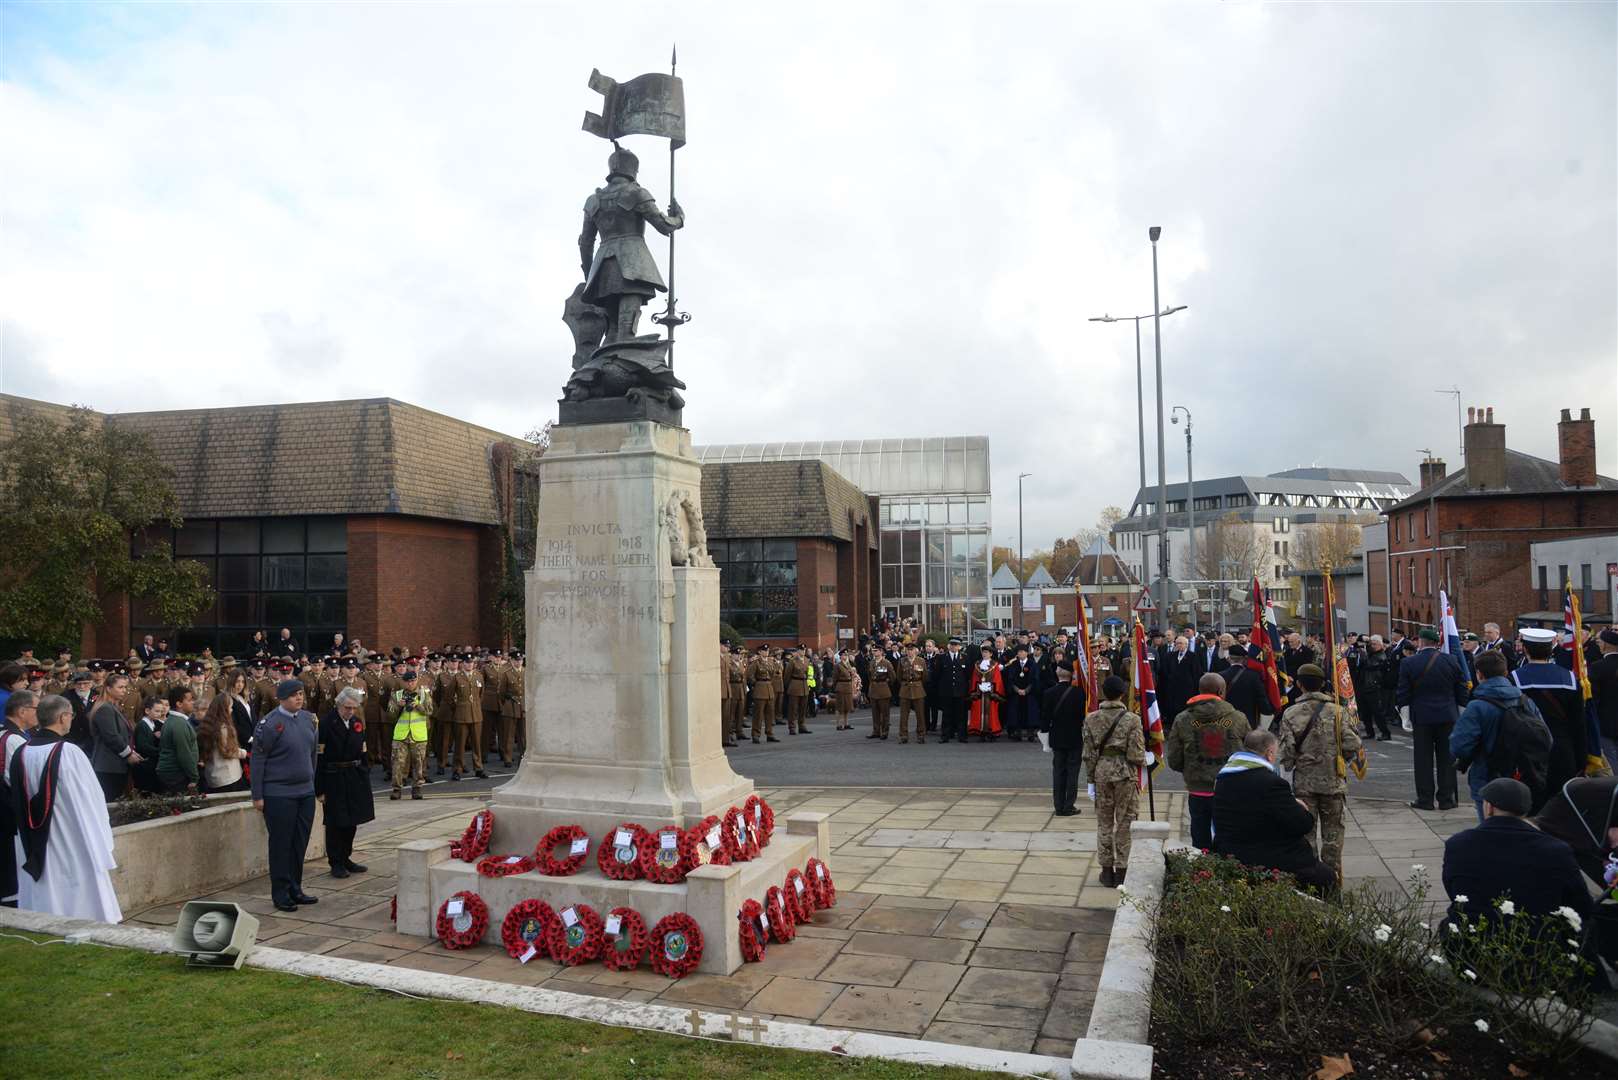 The scene around the war memorial for the Remembrance Sunday service, Maidstone. Picture: Chris Davey